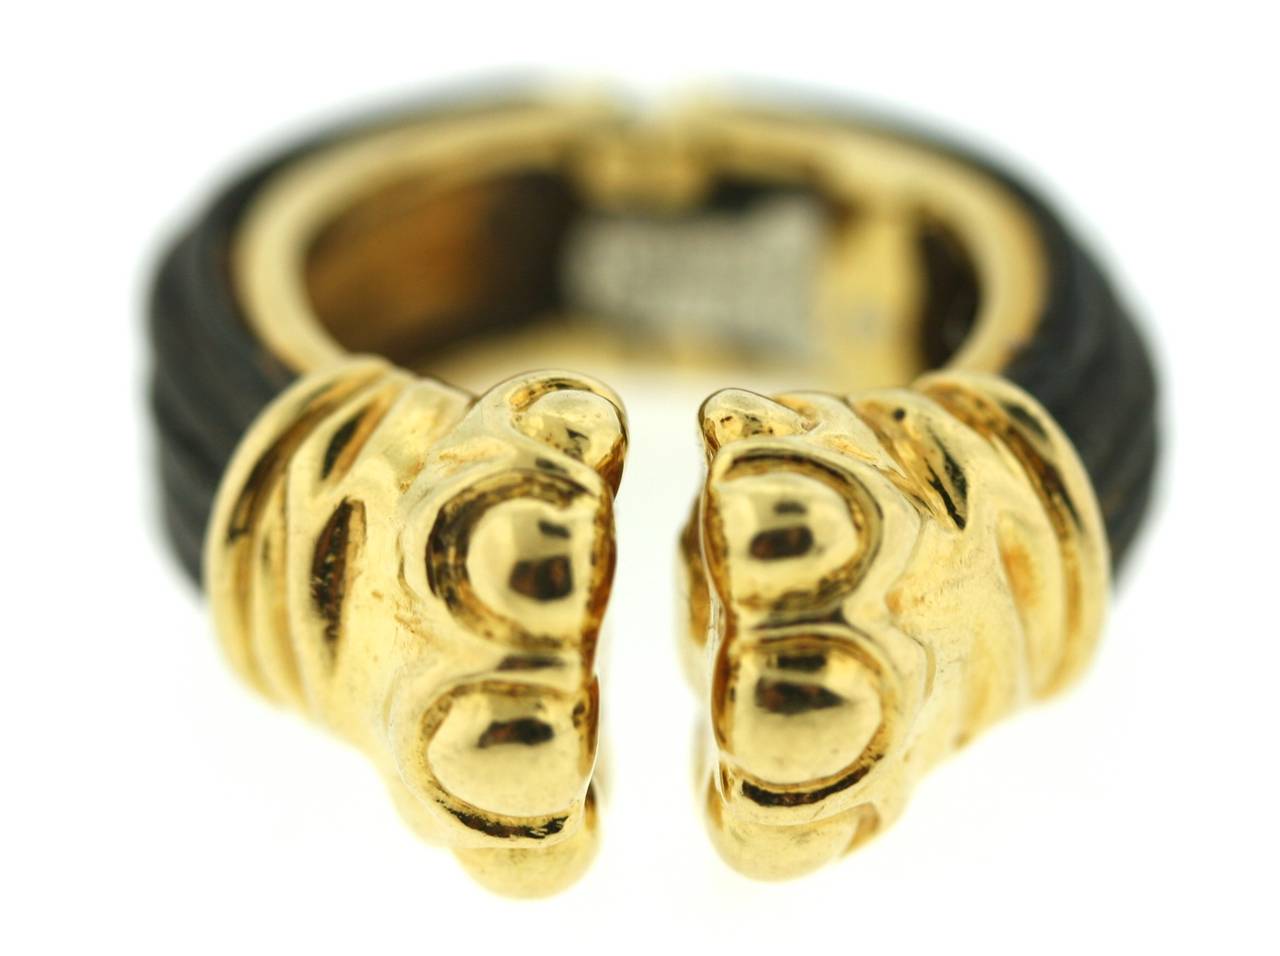 This whimsical design by Donald Claflin for Tiffany & Co is a fun and stylish piece. Mounted in 18k gold this elephant hair ring has two center elephant feet which part slightly when placed on the finger to accommodate a slight variation in finger